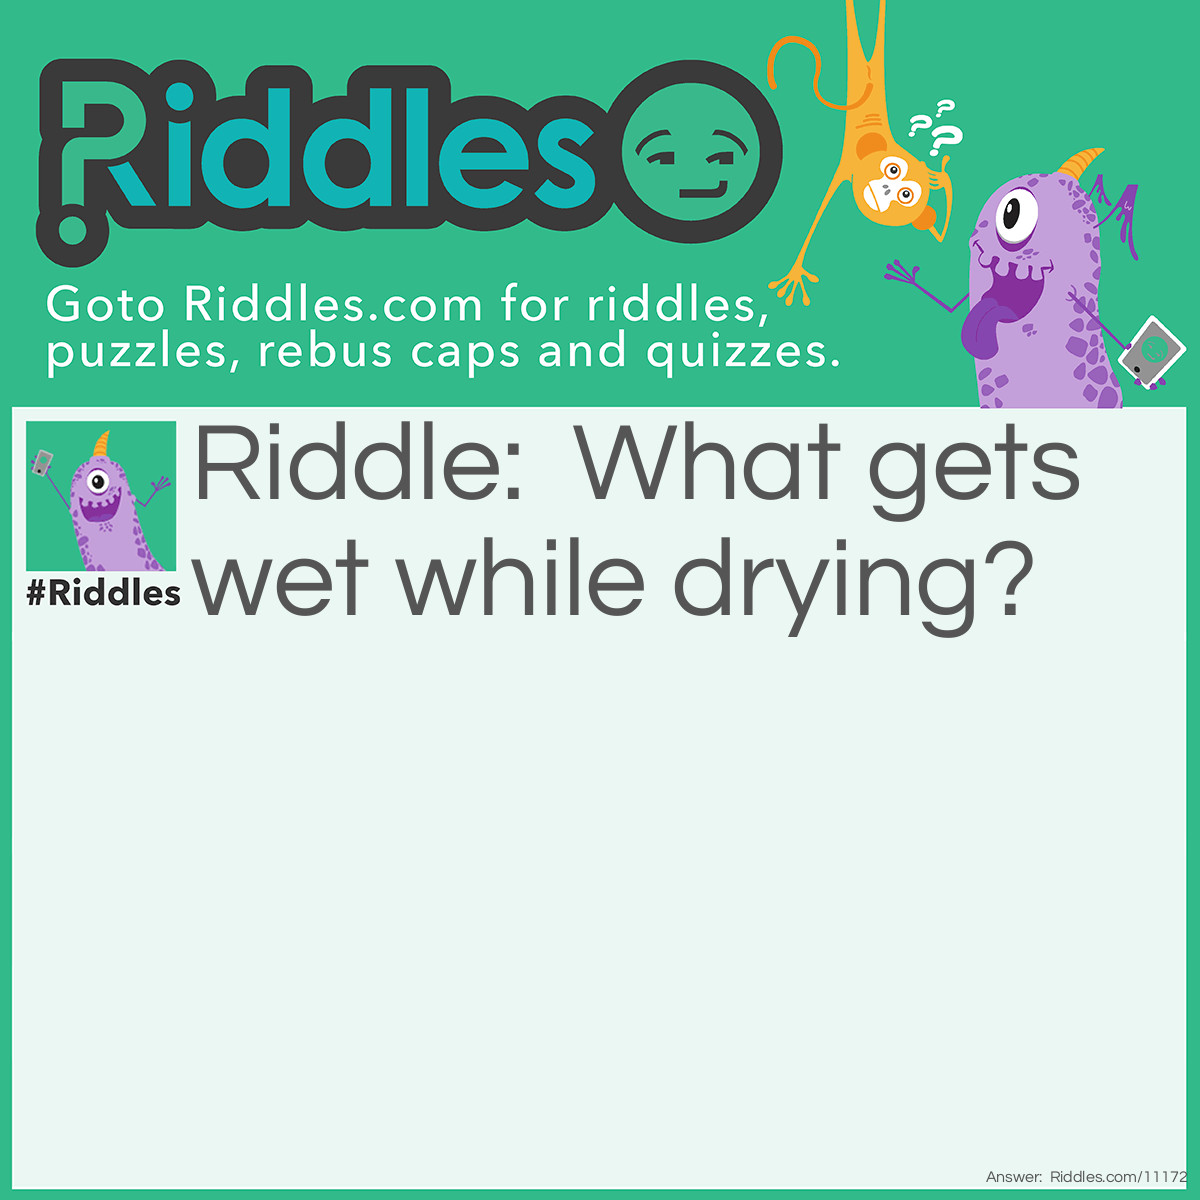 Riddle: What gets wet while drying? Answer: A towel.